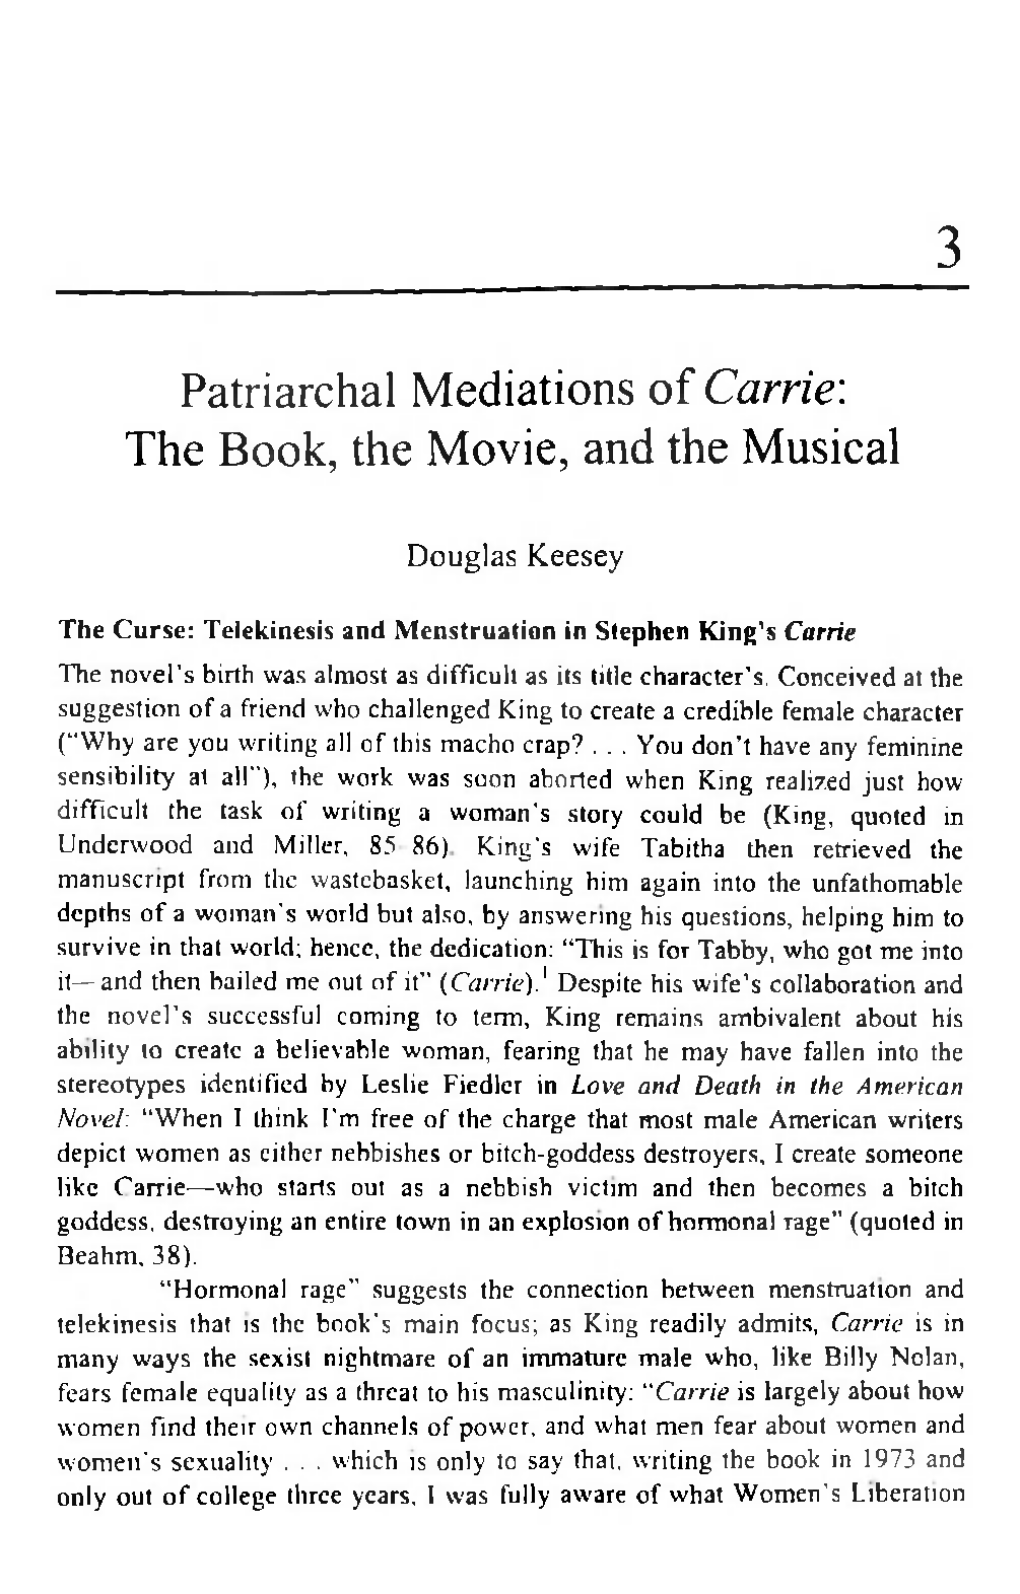 Patriarchal Mediations of Carrie: the Book, the Movie, and the Musical